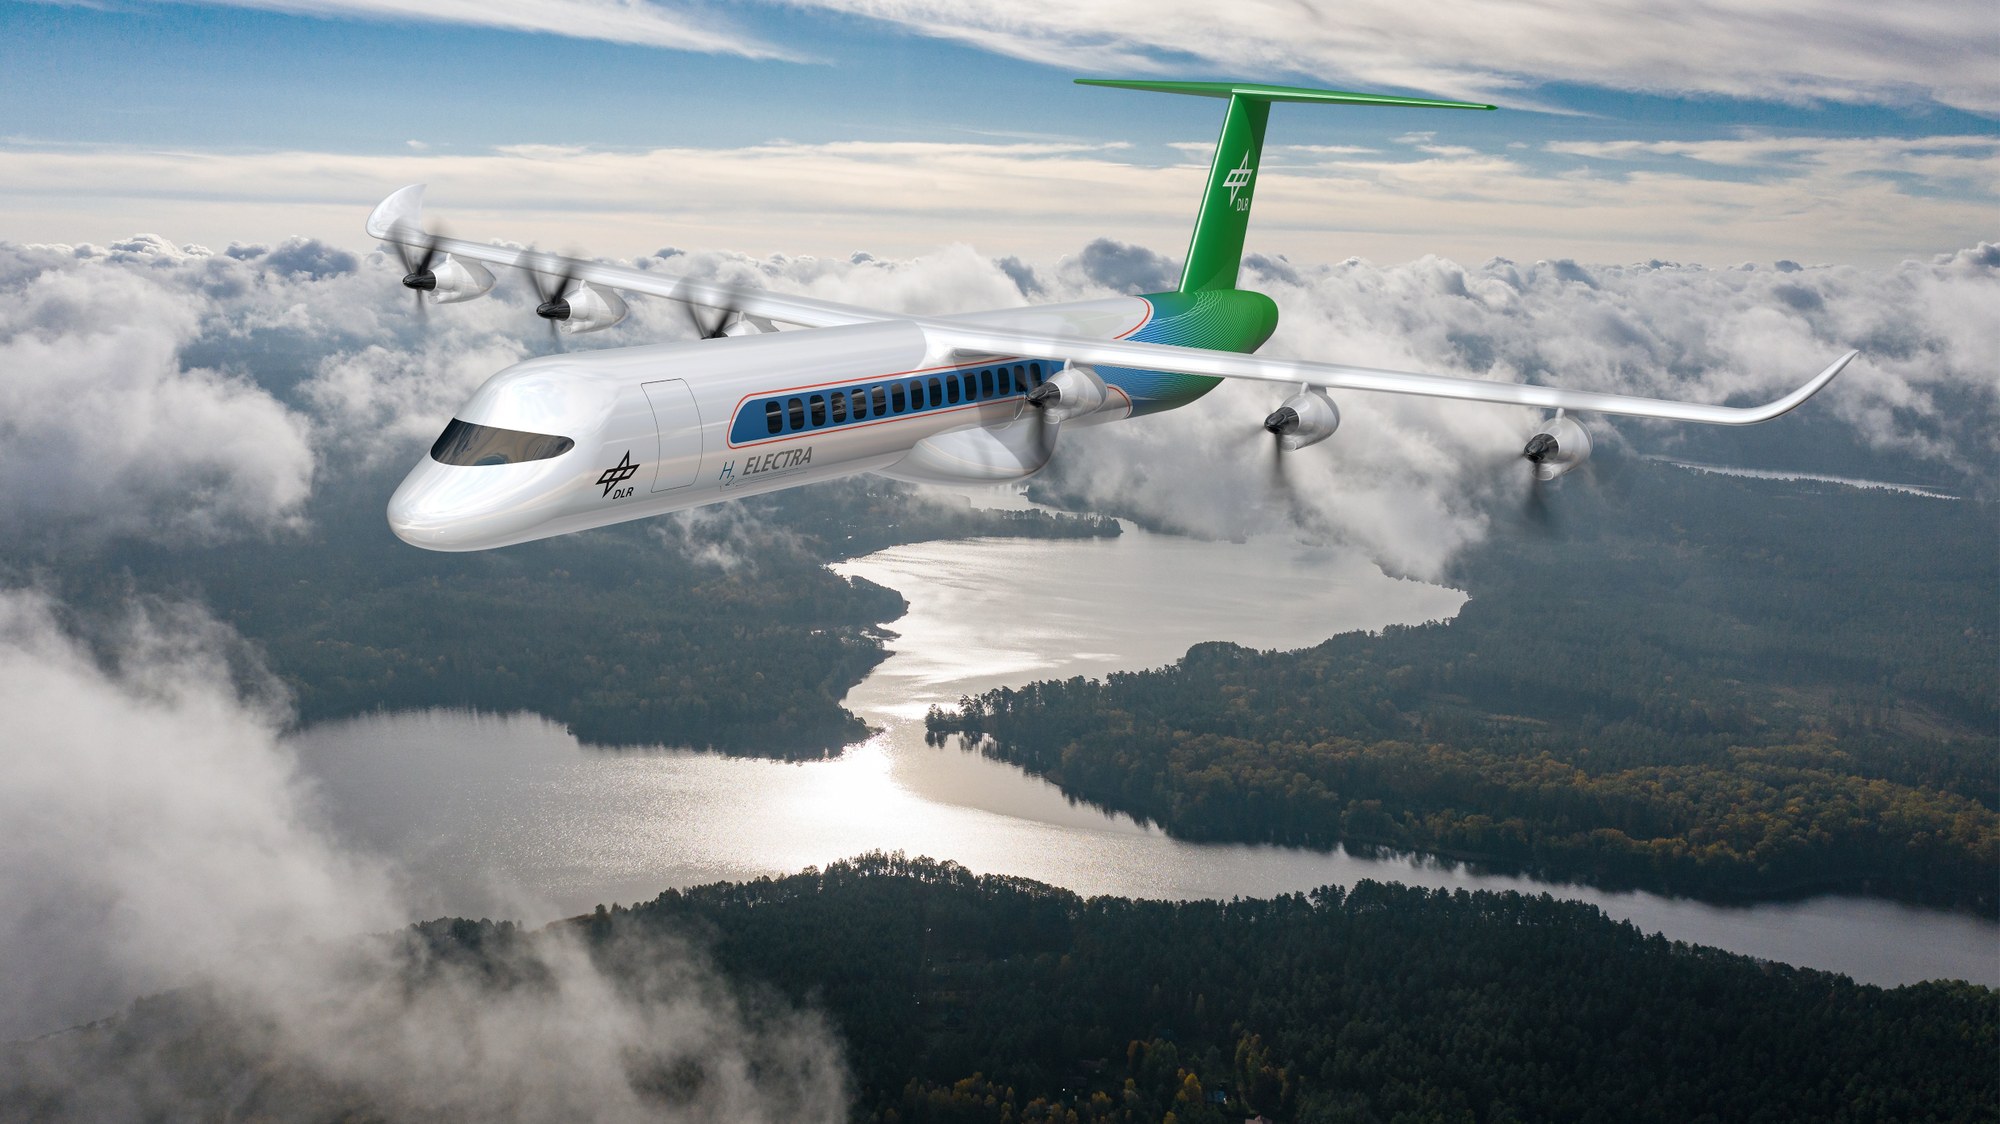 Aviation propulsion concepts for regional aircraft of the future